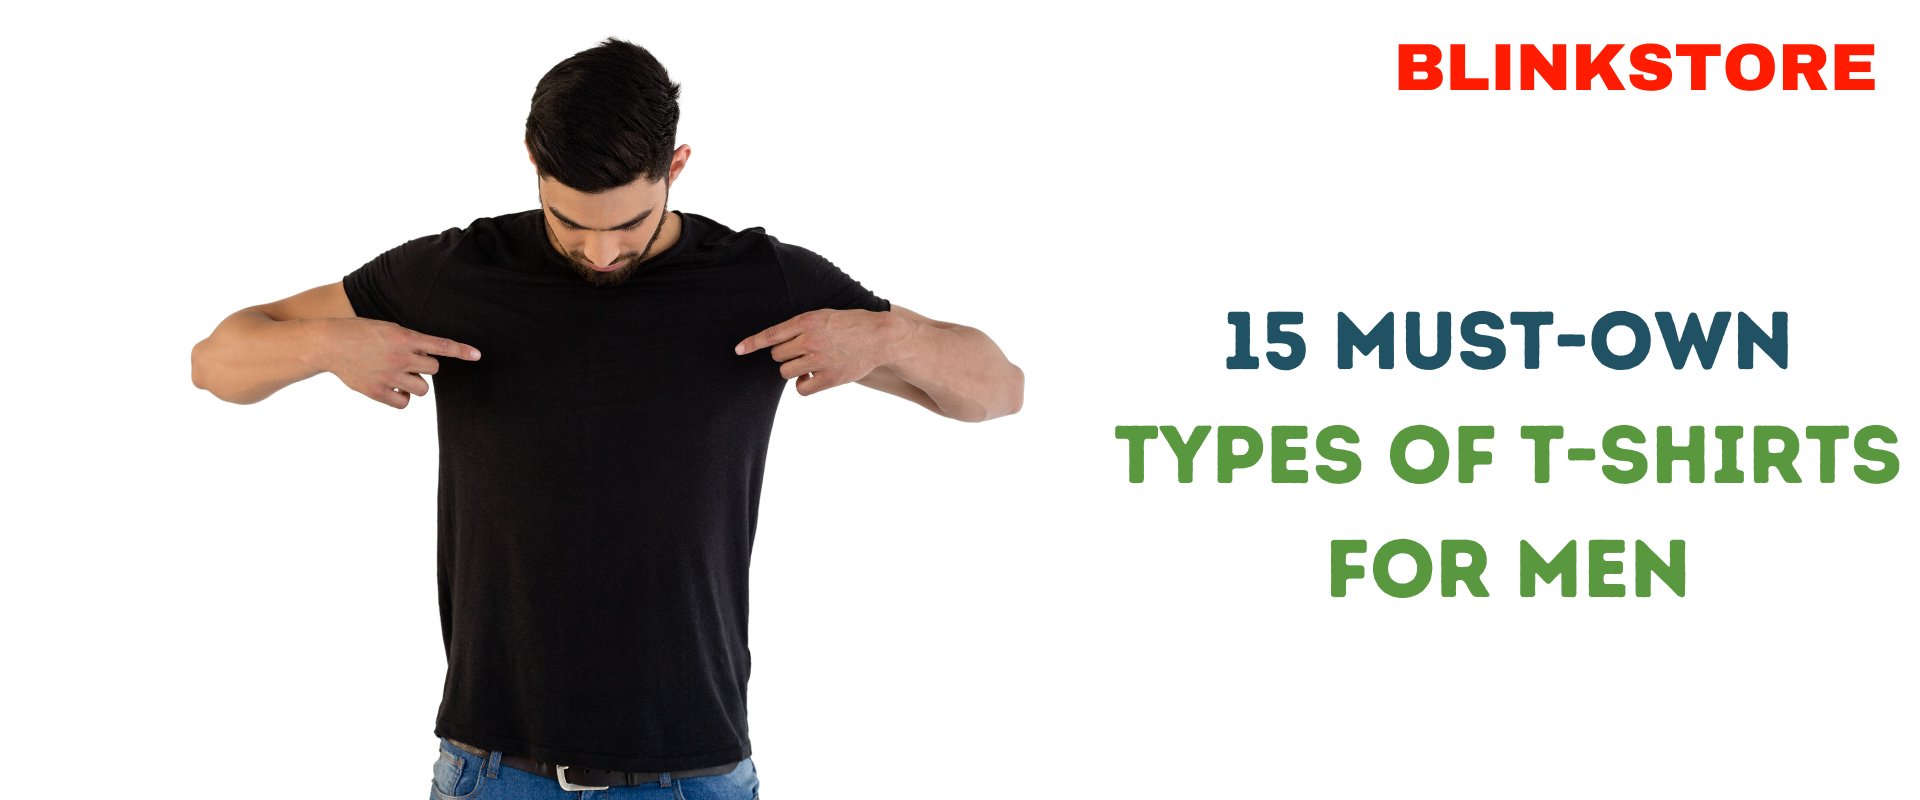 15 Must-Own Types of T-shirts for Men